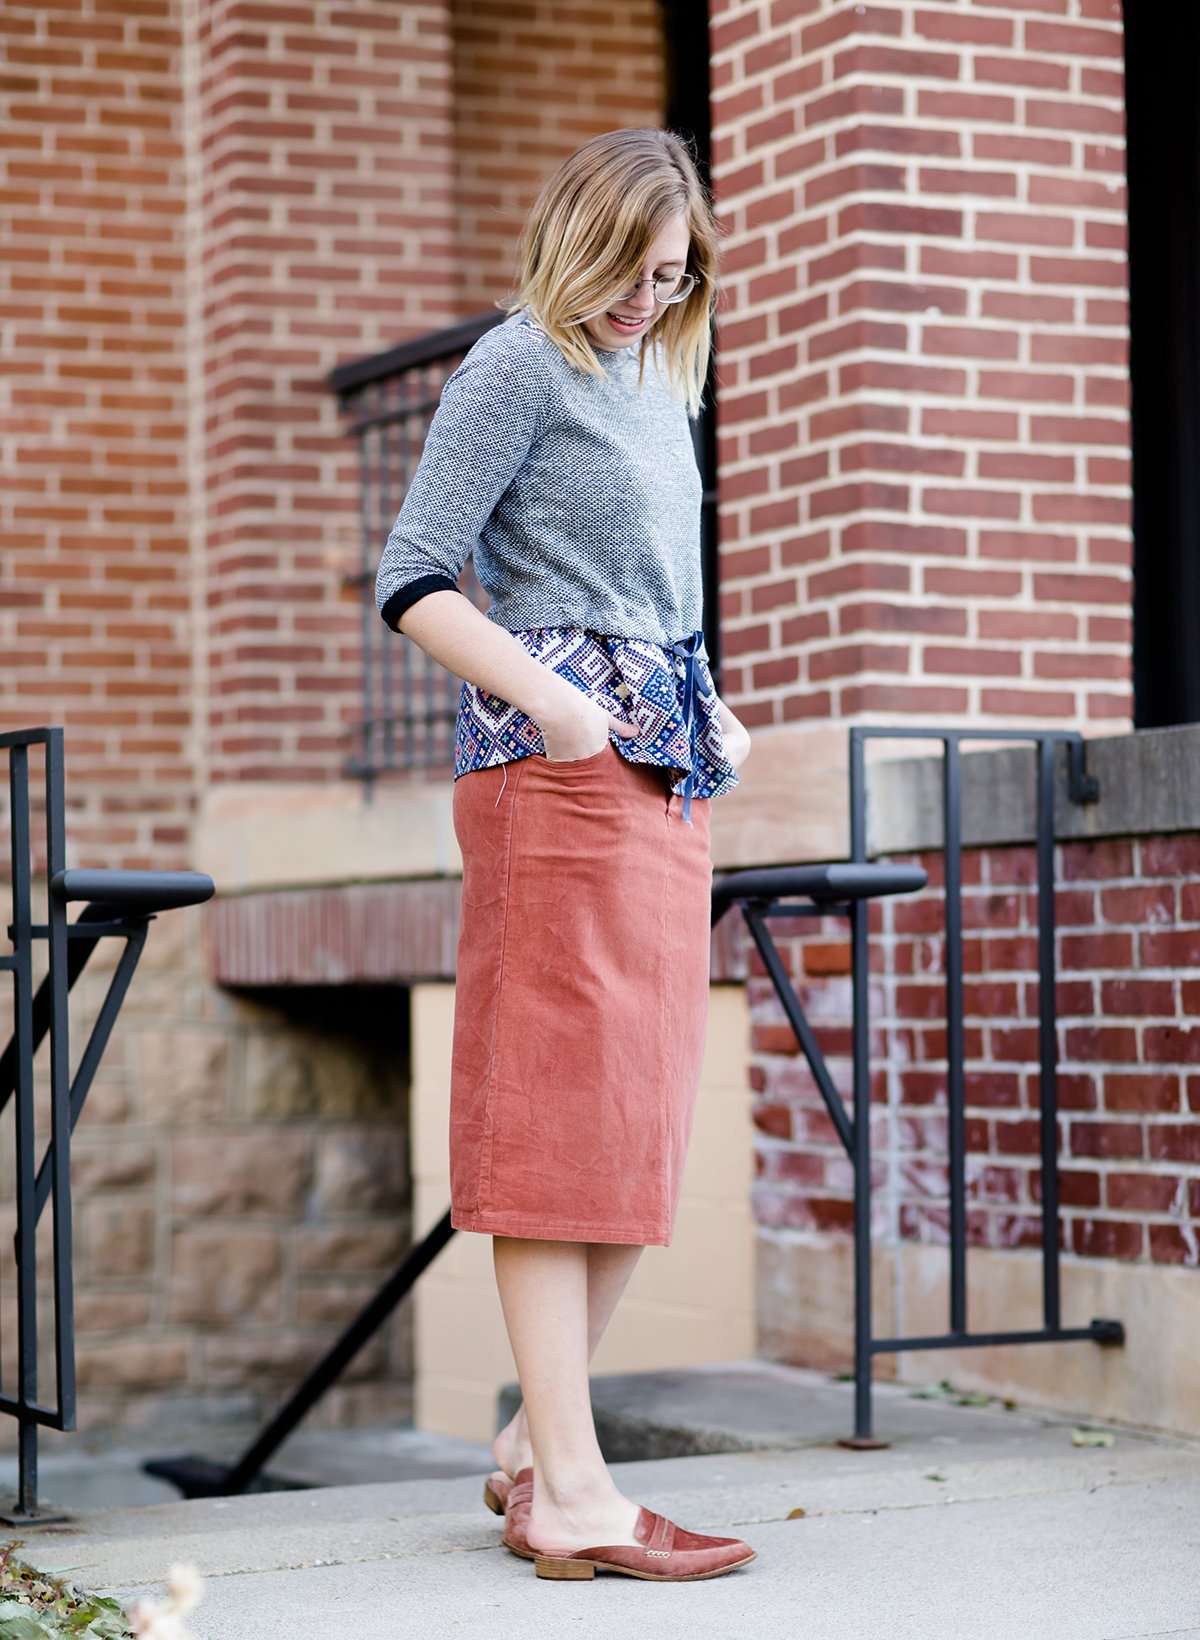 Woman wearing a classic copper colored backless genuine leather loafer